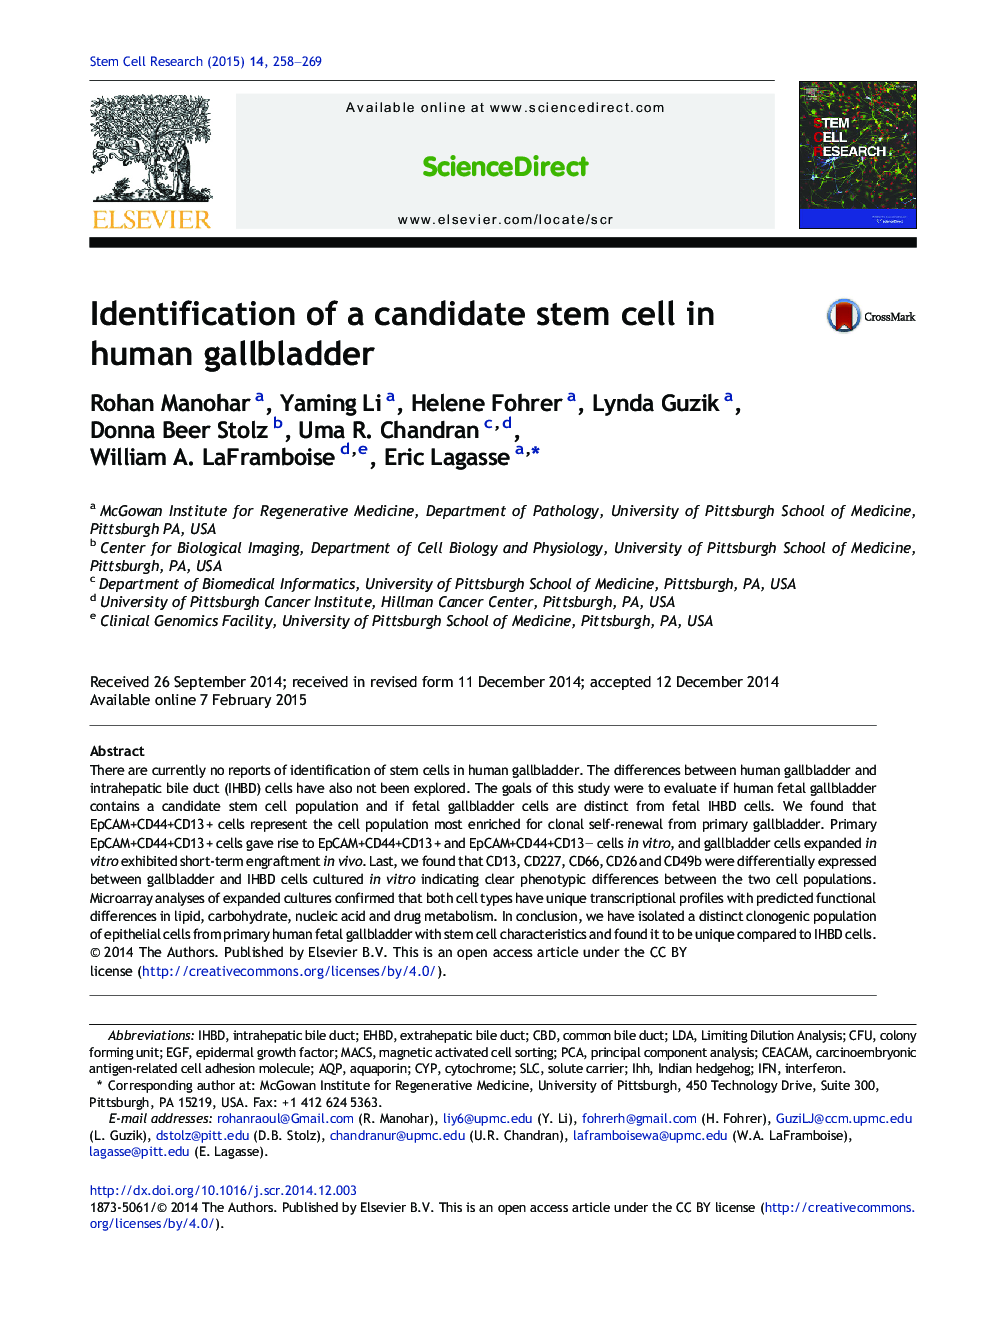 Identification of a candidate stem cell in human gallbladder